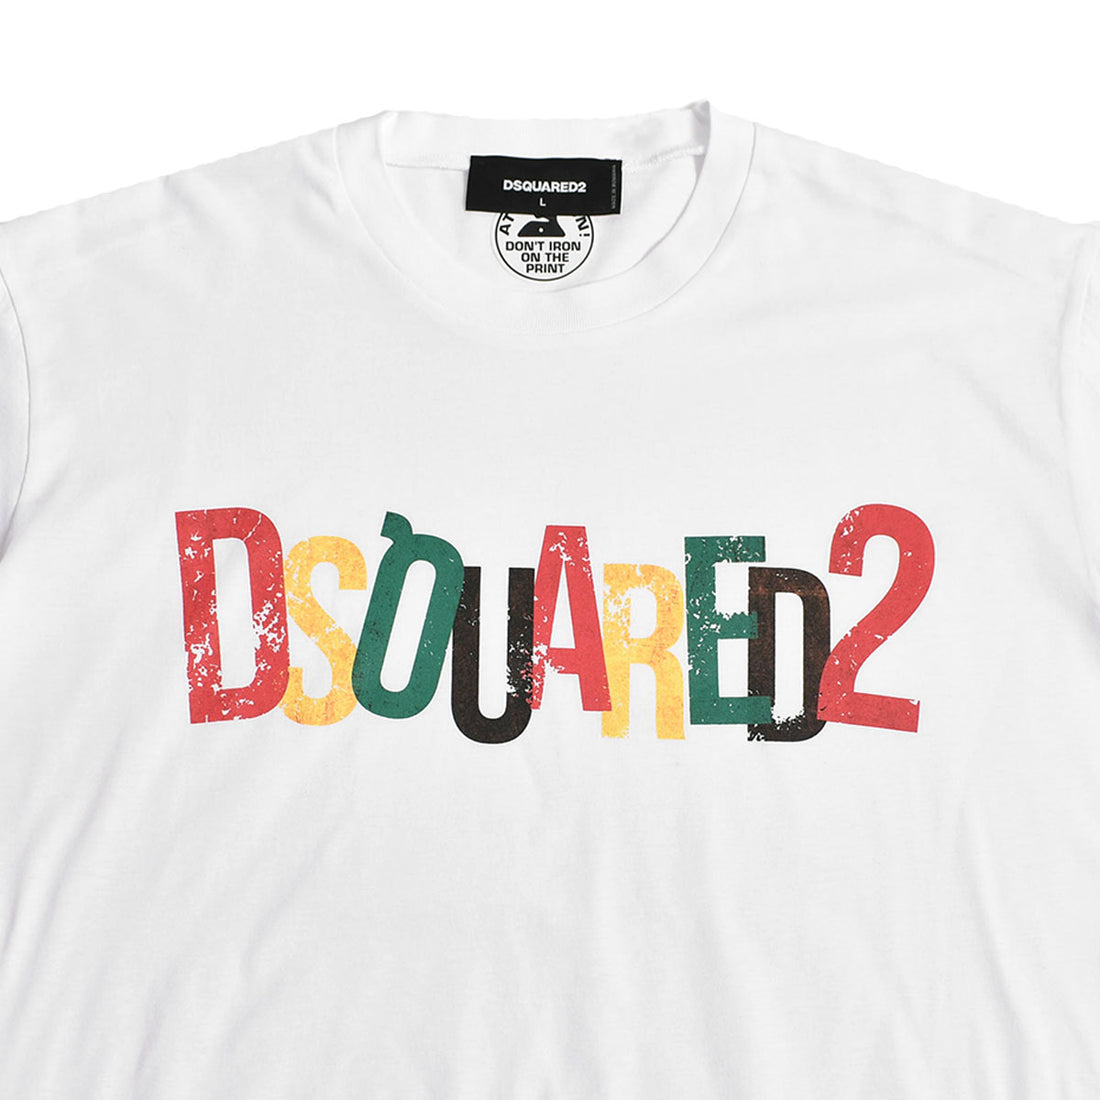 [DSQUARED2]COLORFUL LOGO T-SHIRT/WHITE(S71GD1249)